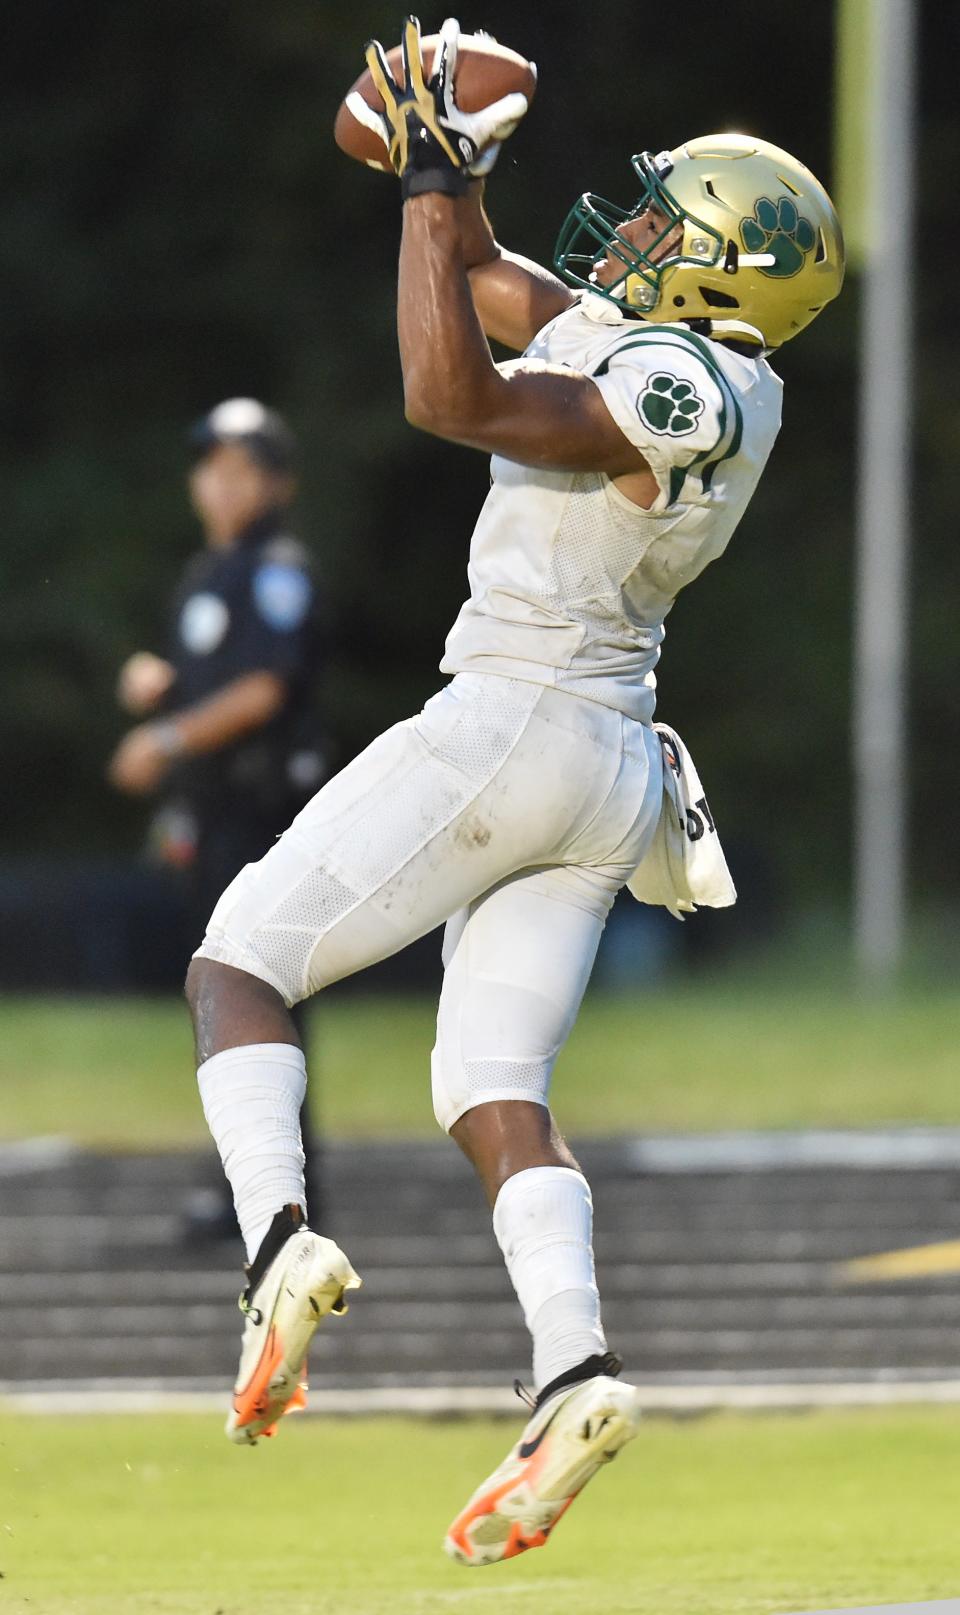 Nease's WR (1) Dom Henry pulls in a pass for a touchdown during second quarter action. Atlantic Coast High School hosted Nease for their football matchup Friday, September 17, 2021.